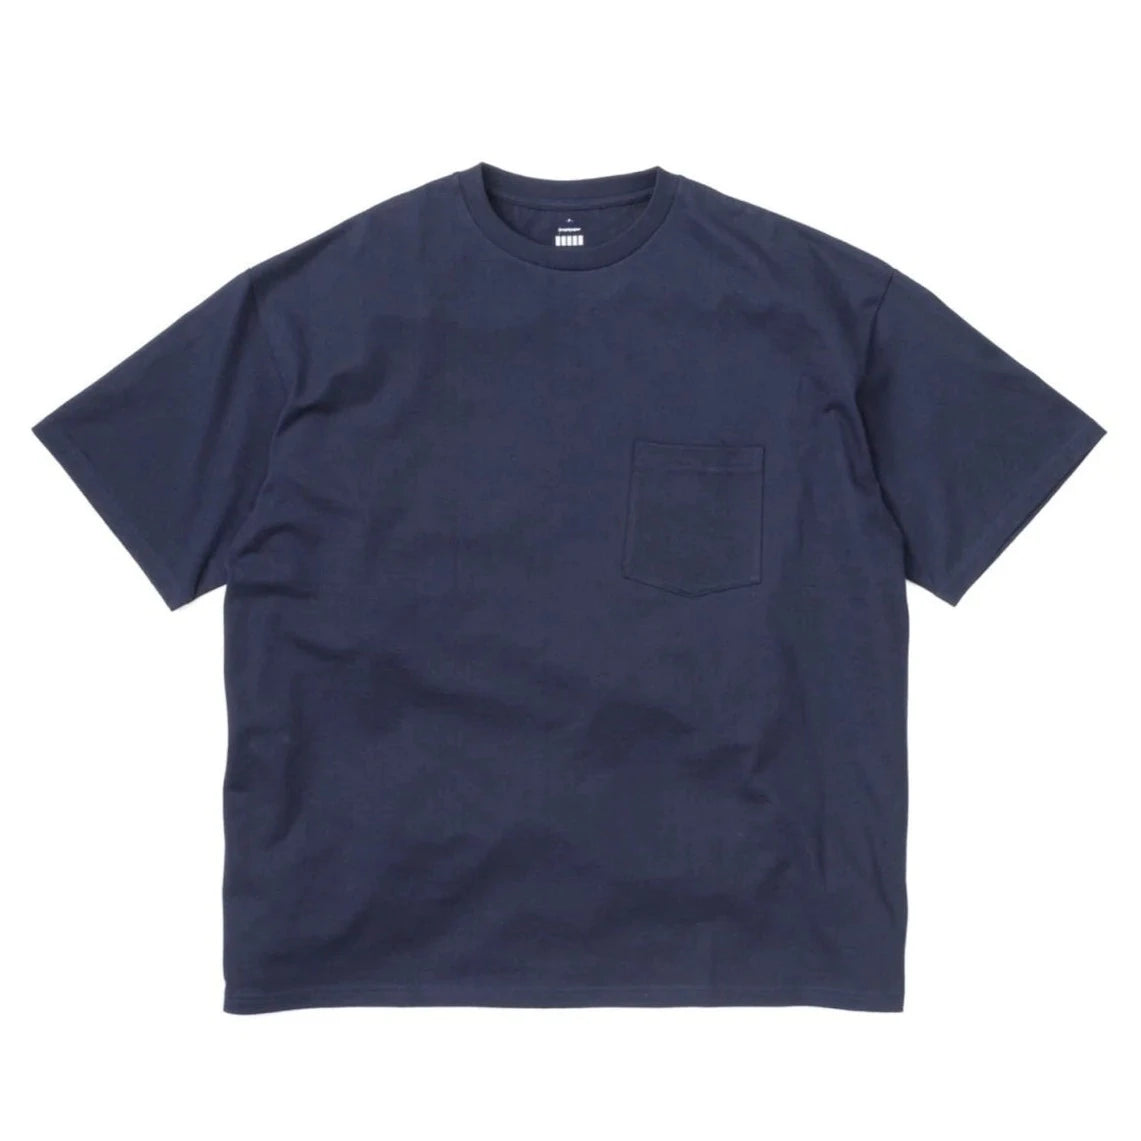 Graphpaper / S/S Oversized Pocket Tee